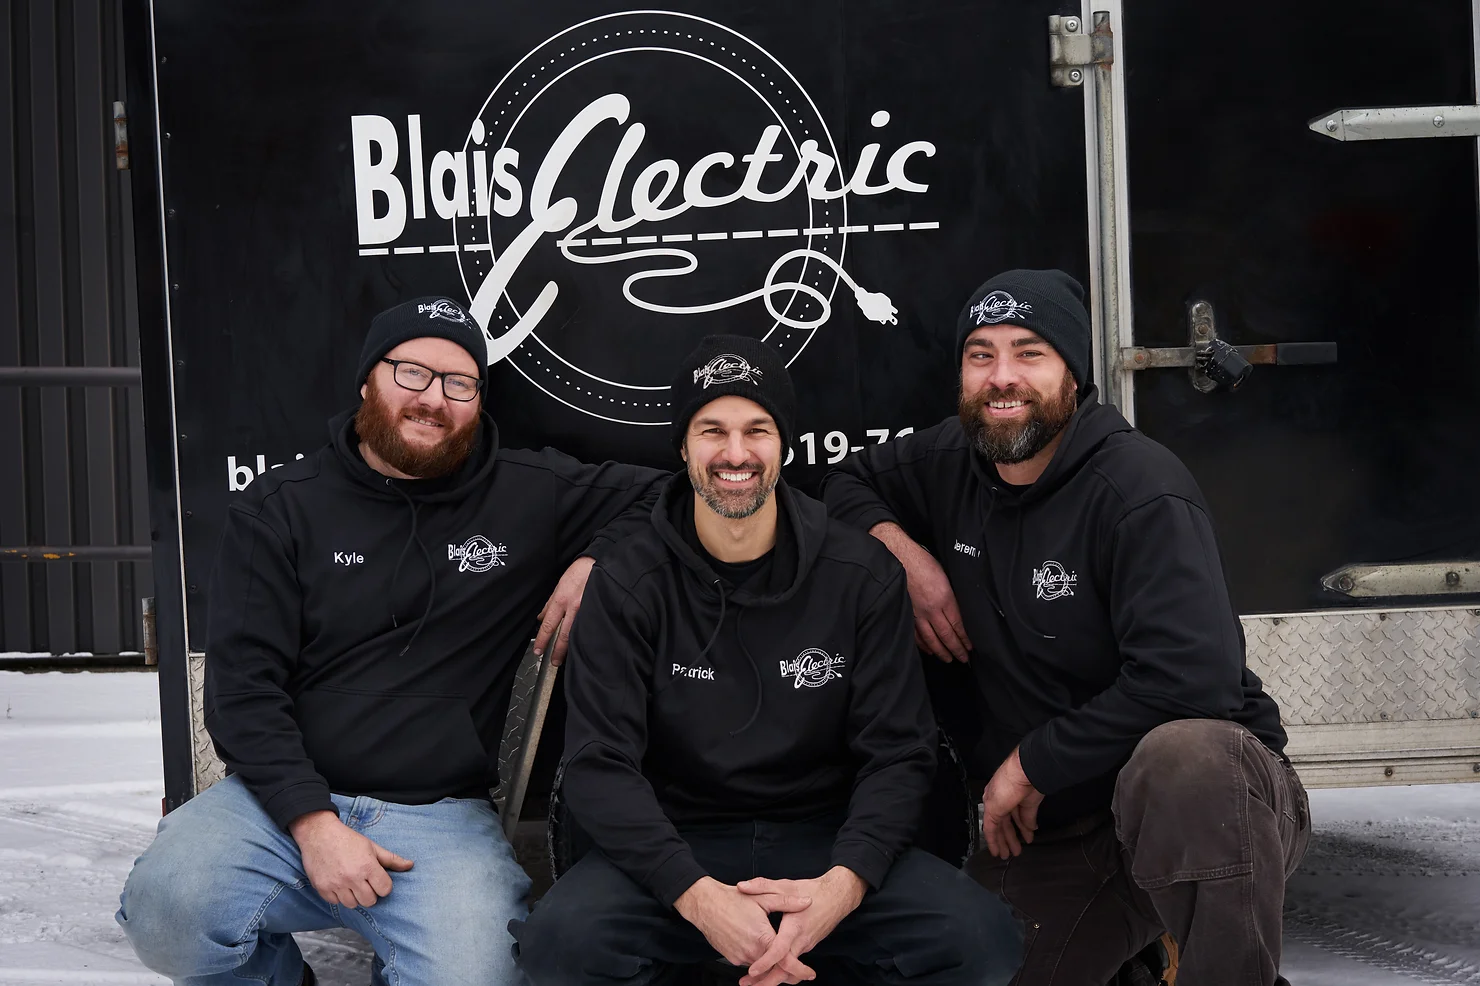 Three smiling people in matching black hoodies pose in front of a trailer with "Blais Electric" logo. They appear to be colleagues.